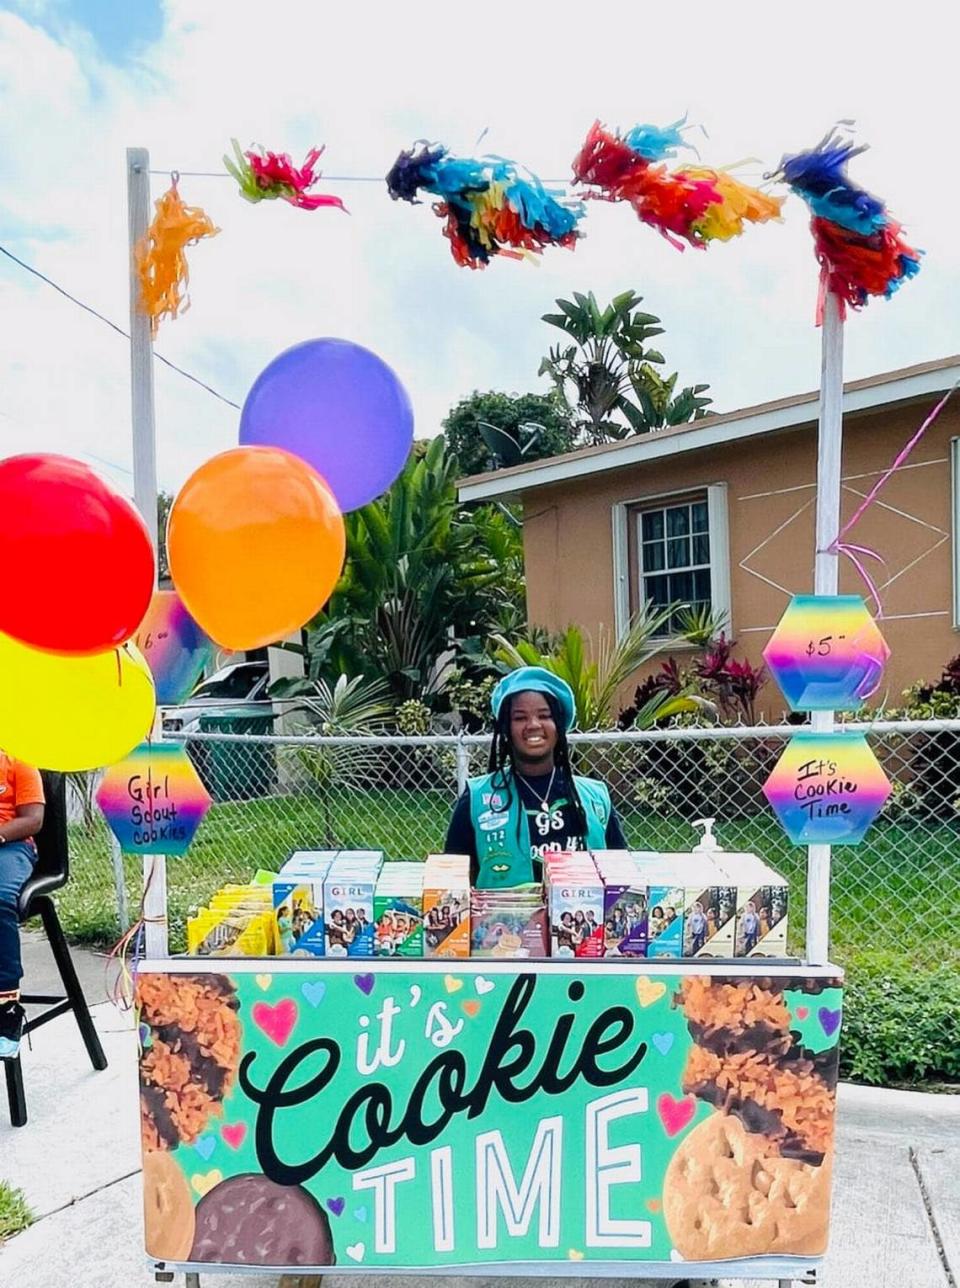 JAaliyah Powell, one of the top cookie sellers in 2022, according to the Girl Scouts of Tropical Florida, which serves Miami-Dade and the Florida Keys.